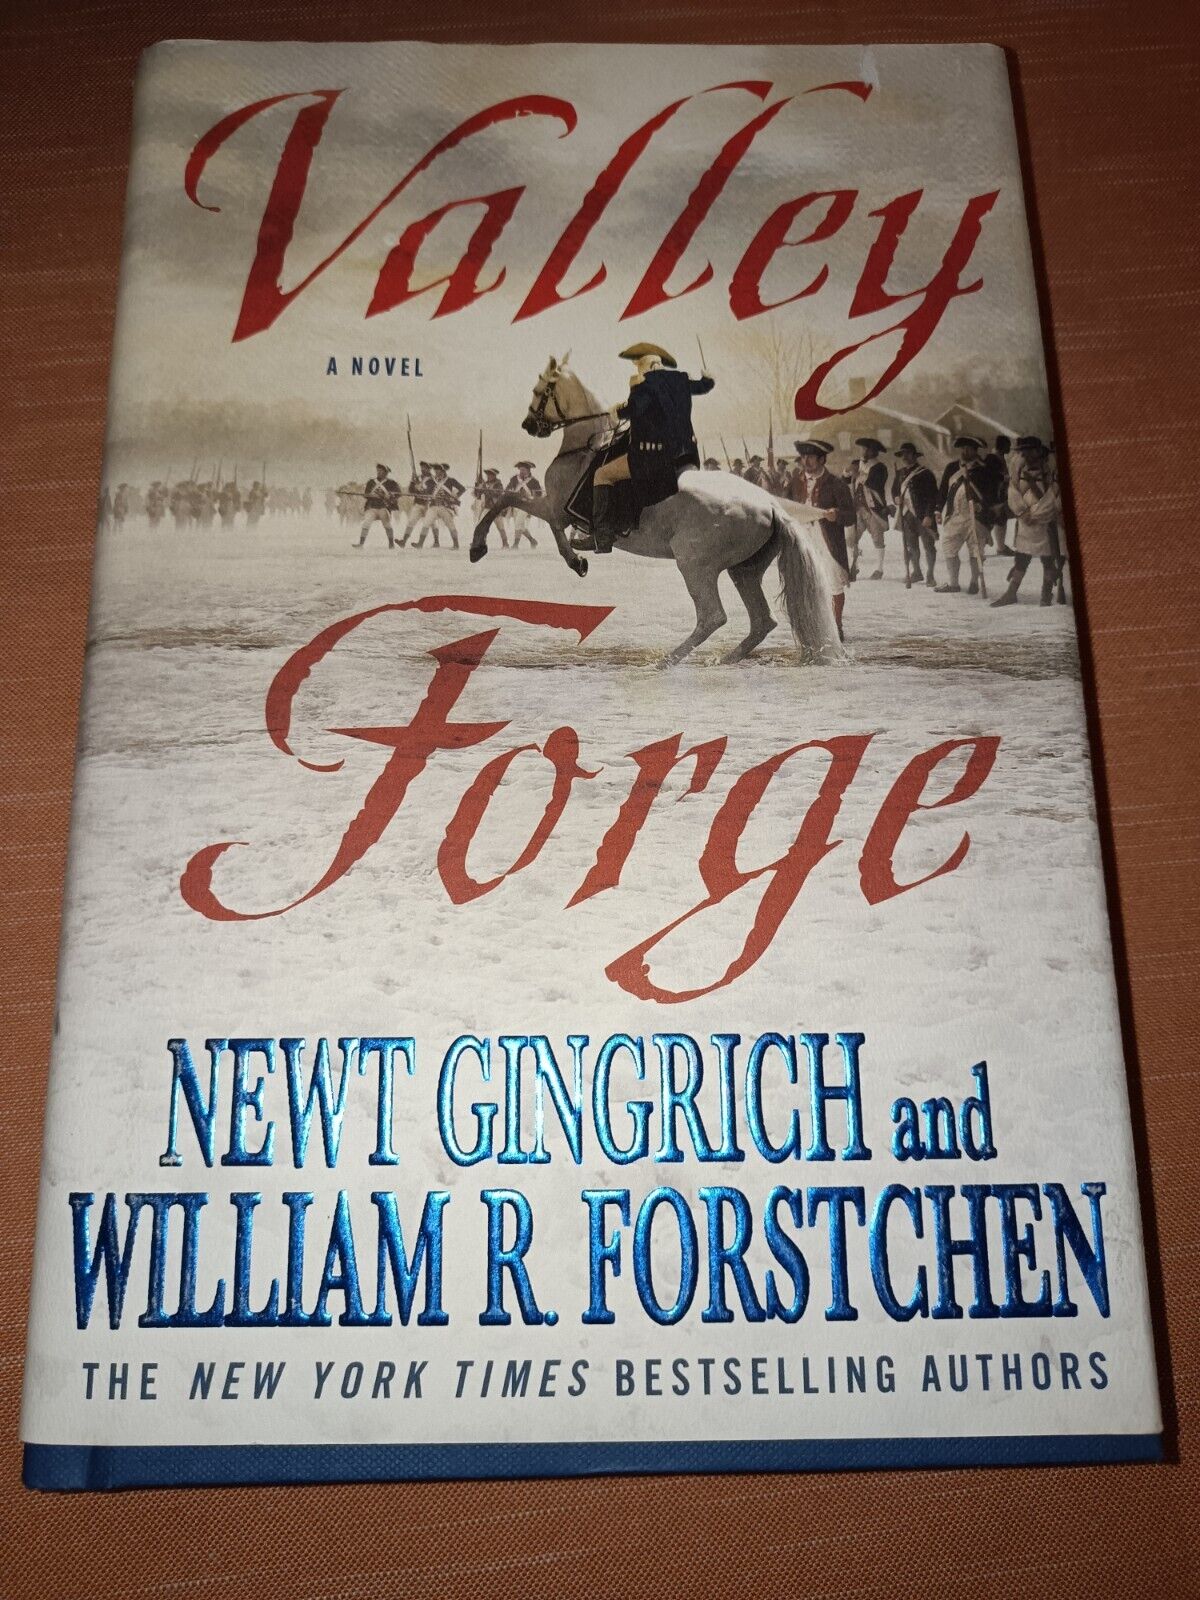 Newt Gingrich Signed Book, Valley Forge, Autographed In Sharpie